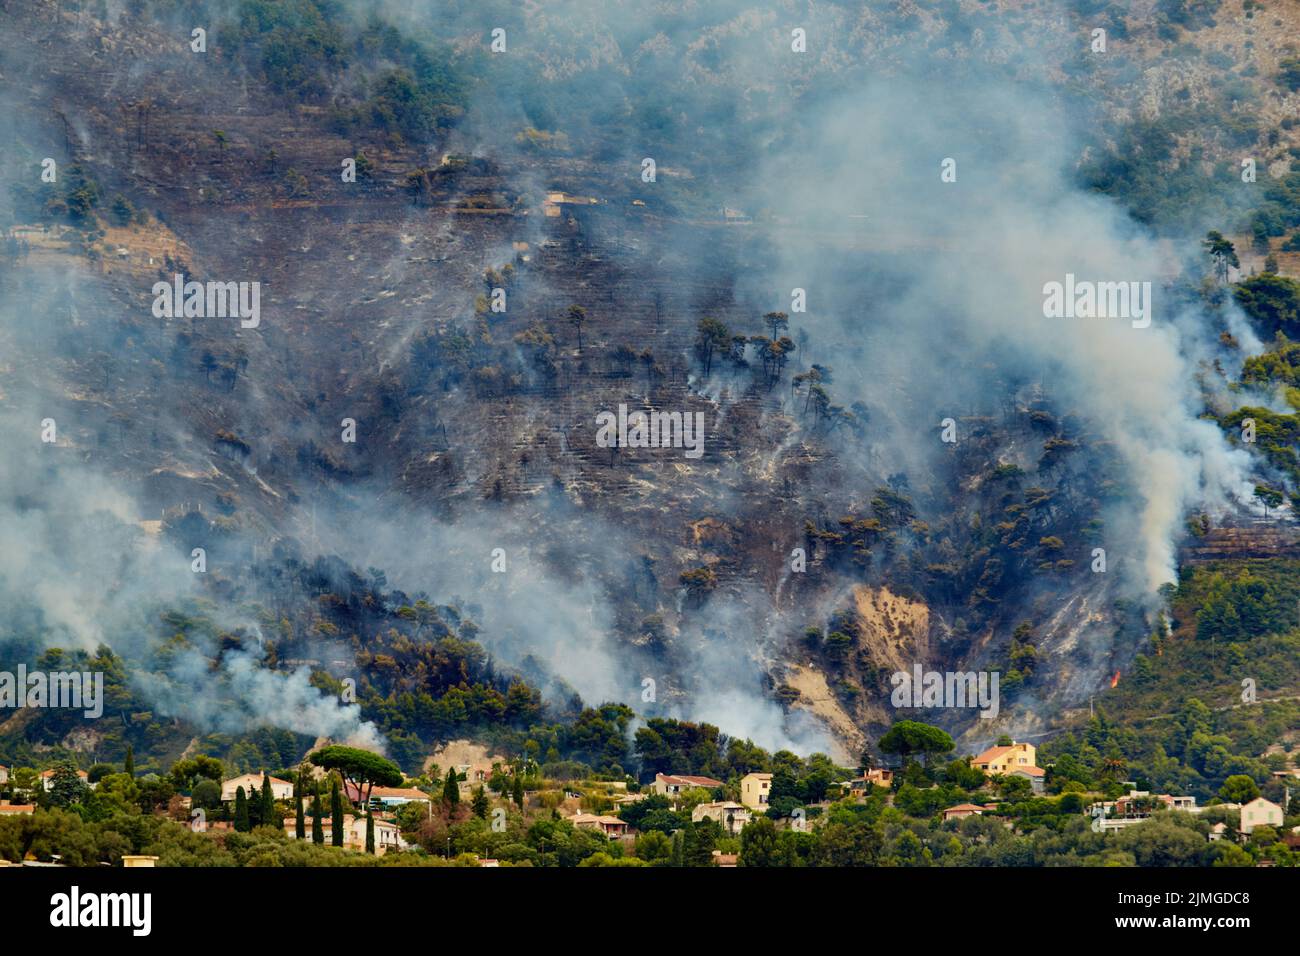 Fire in the forest mountain in the Italian town of Ventimiglia, all the mountains in the smoke, the villa is on fire, the fire s Stock Photo